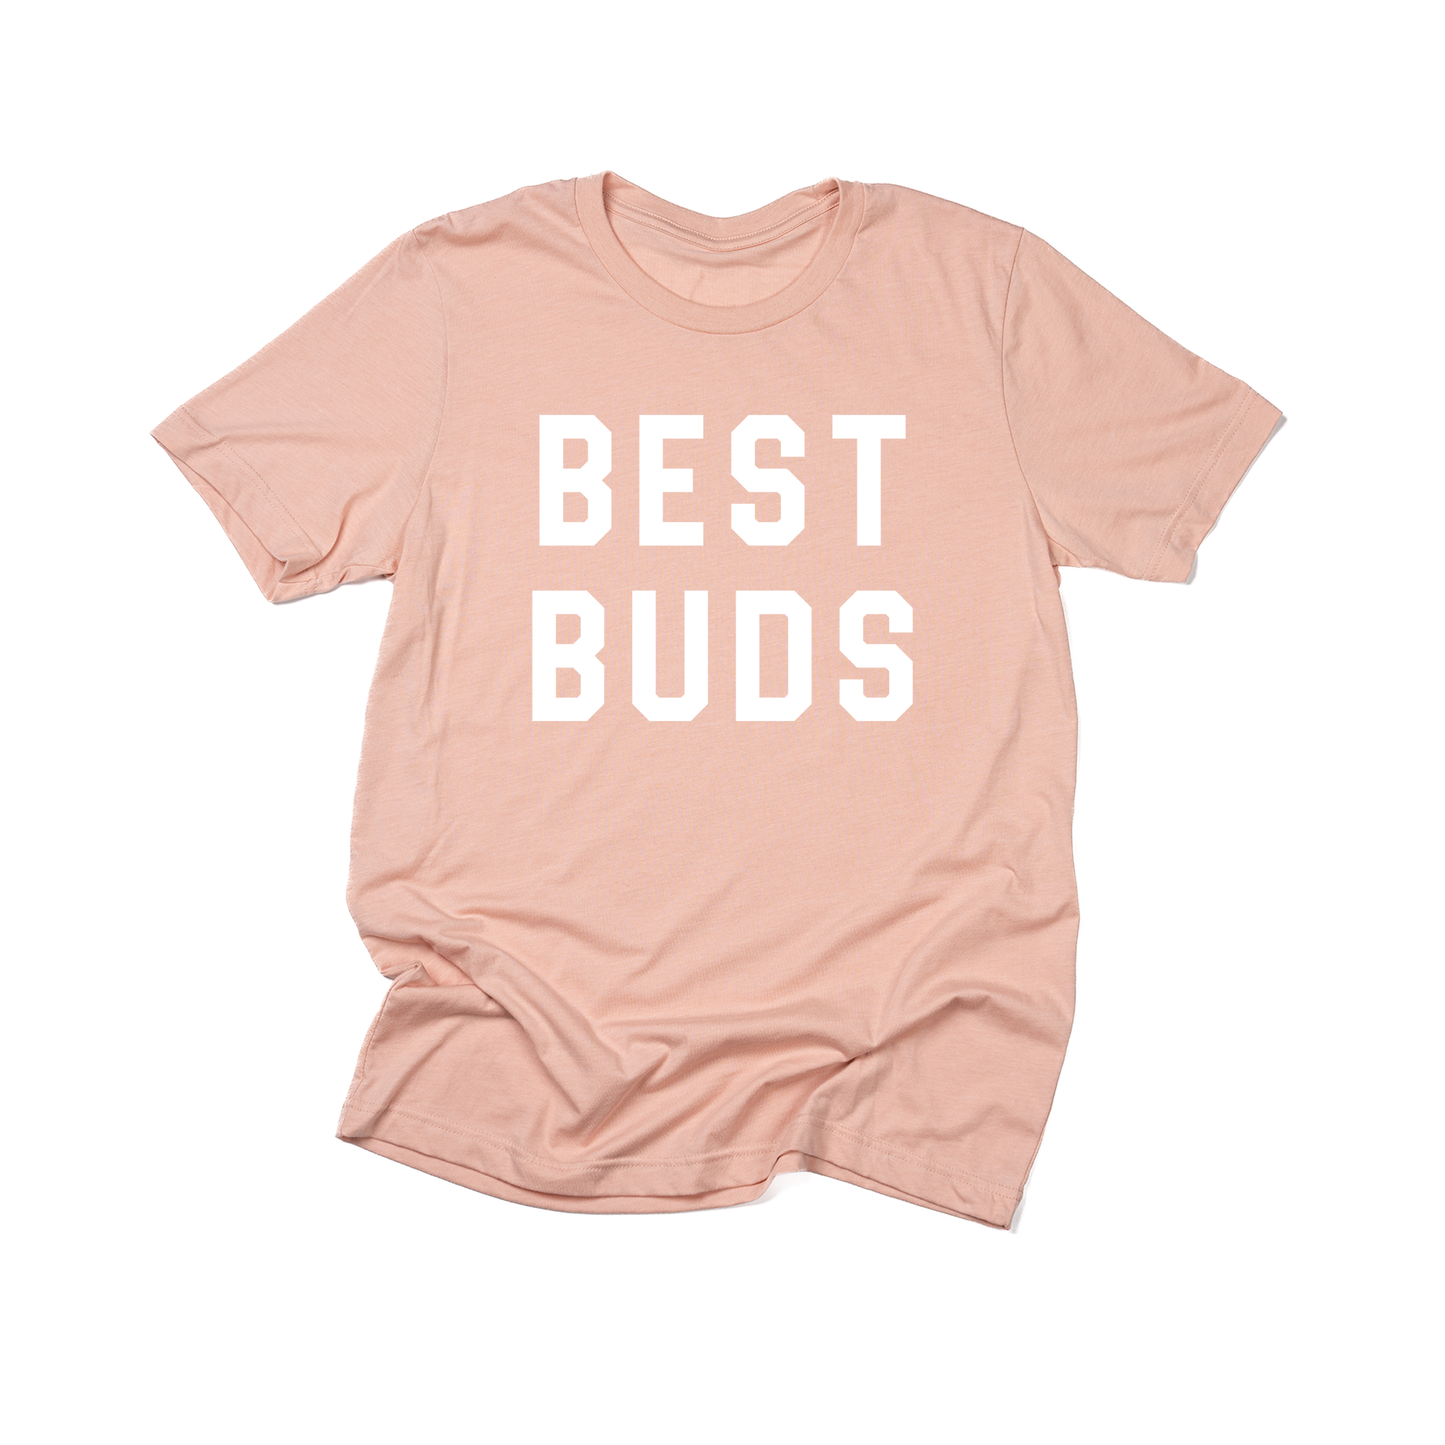 Best Buds (Across Front, White) - Tee (Peach)